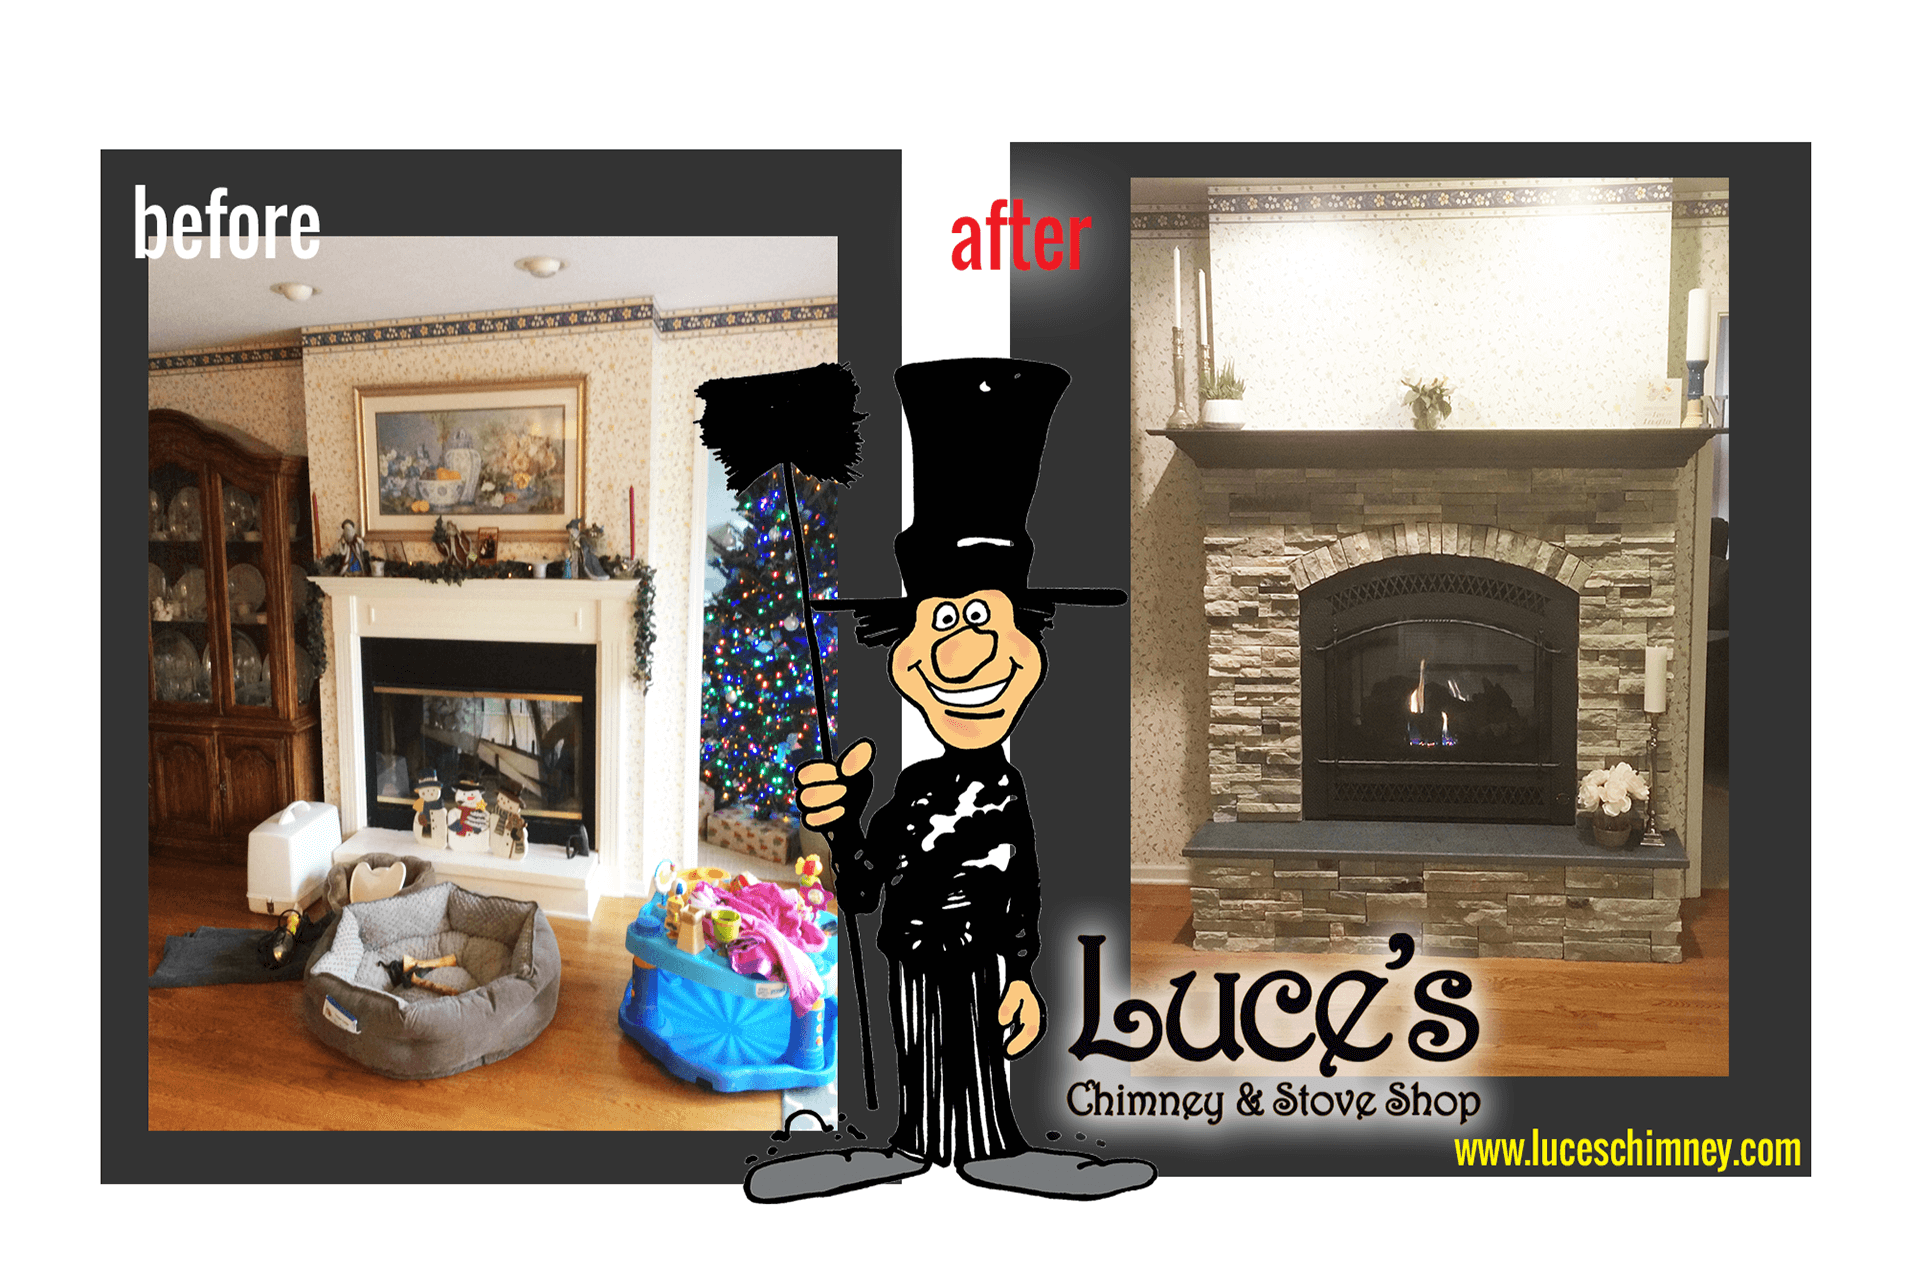 Fireplace remodeling ideas, a before & after updated fireplace, including custom fireplace rock, from Luce's Chimney & Stove Shop.